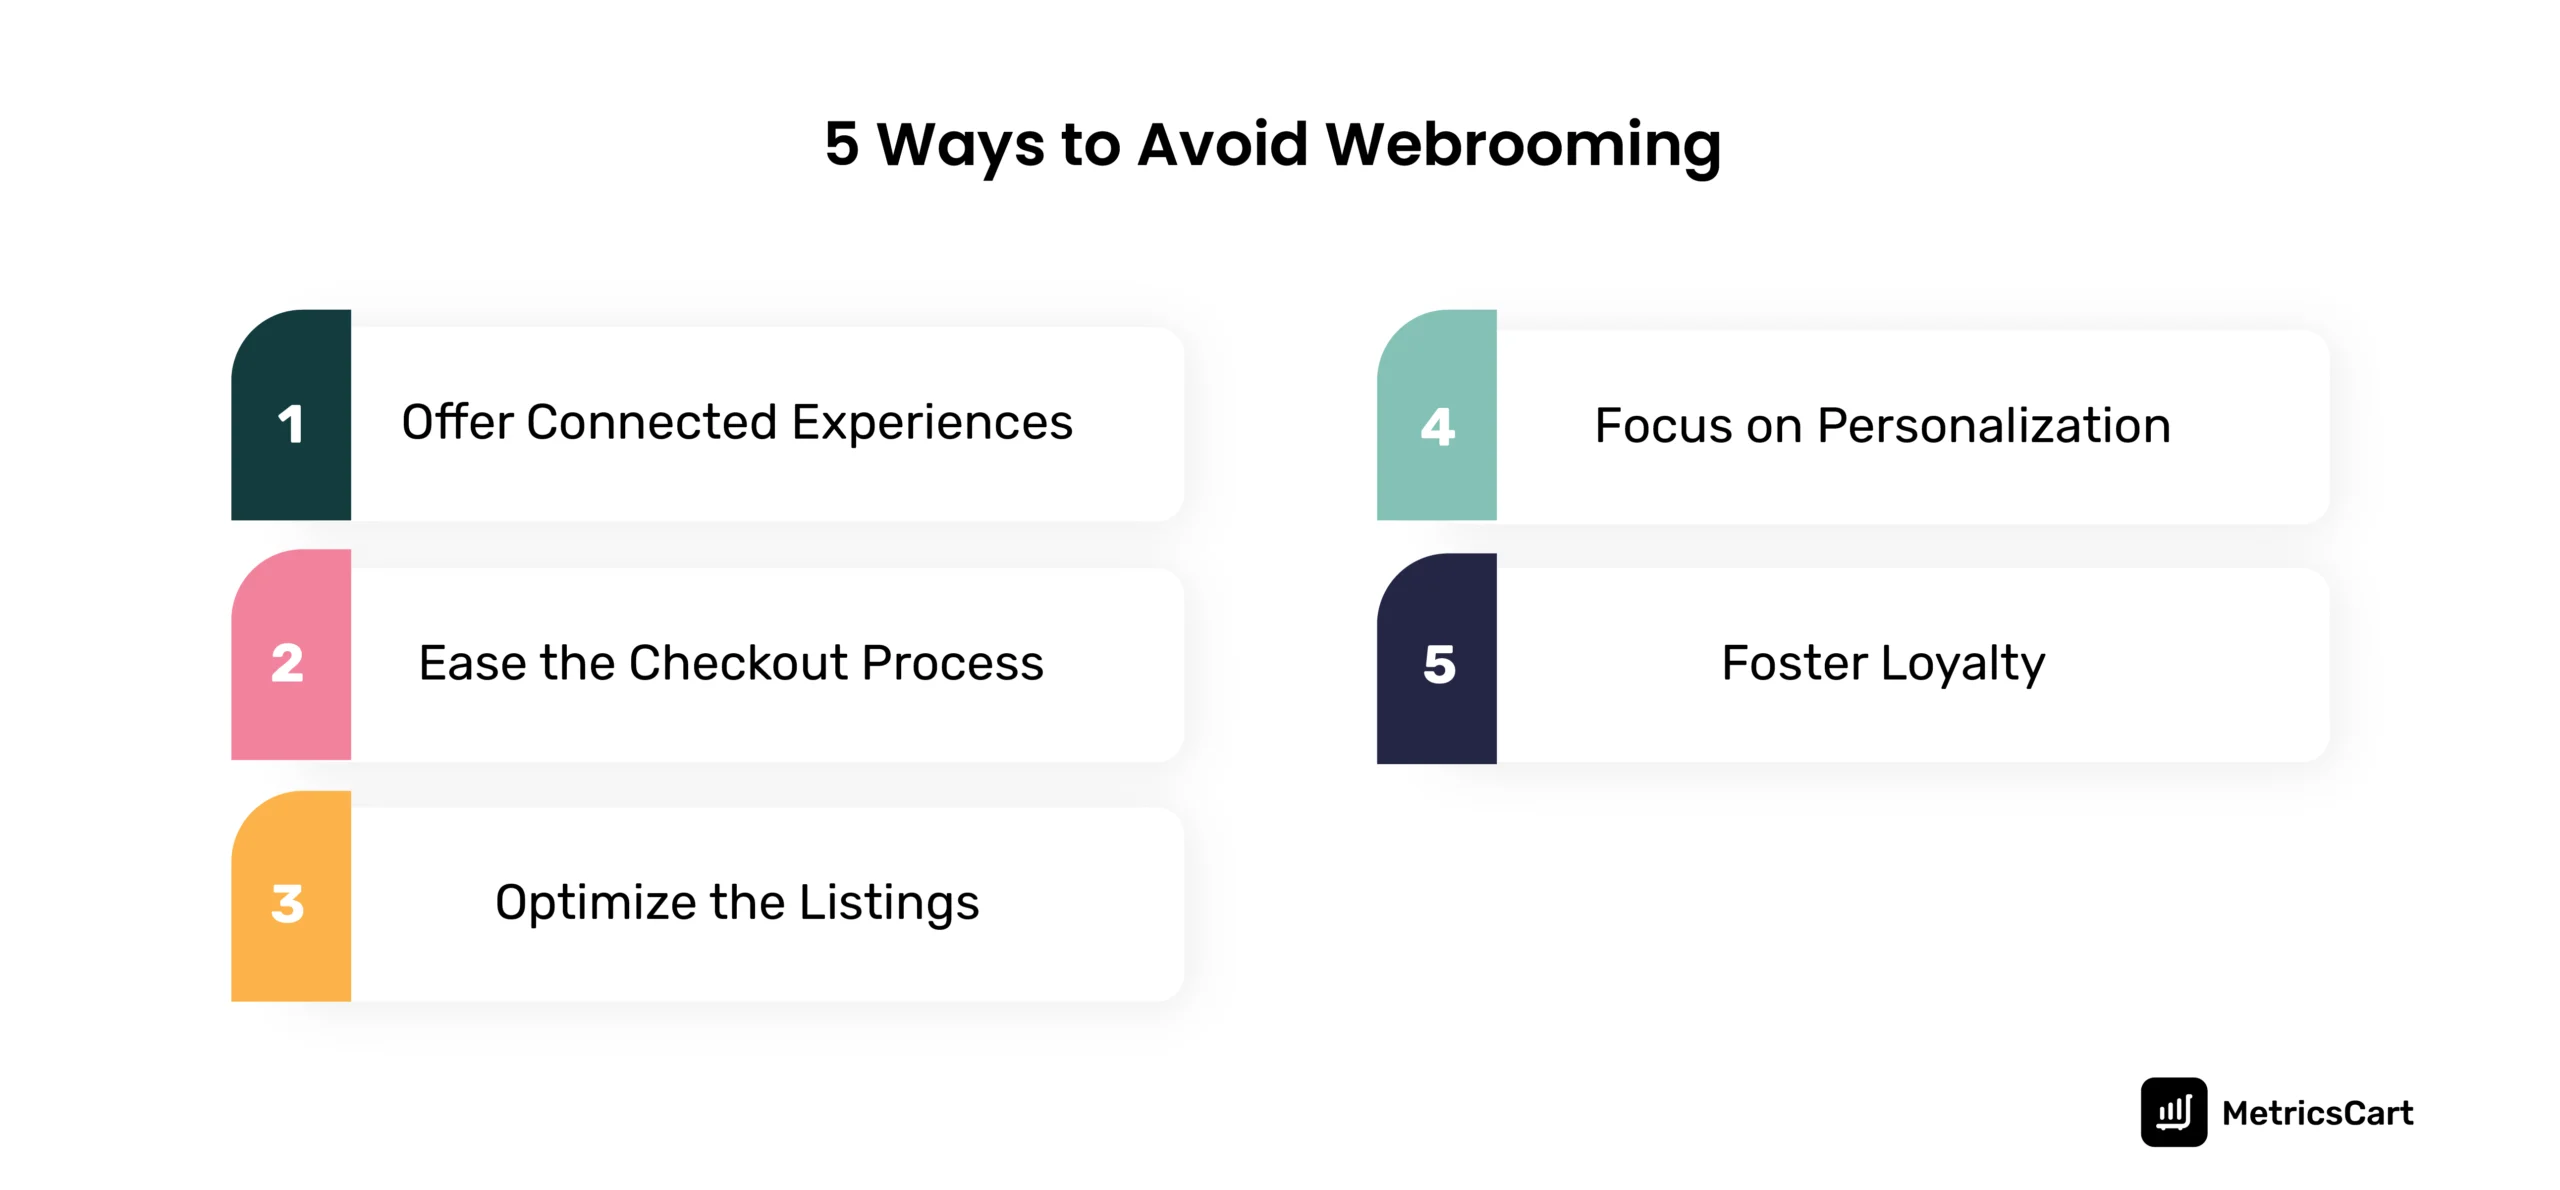 the image shows 5 methods to avoid webrooming